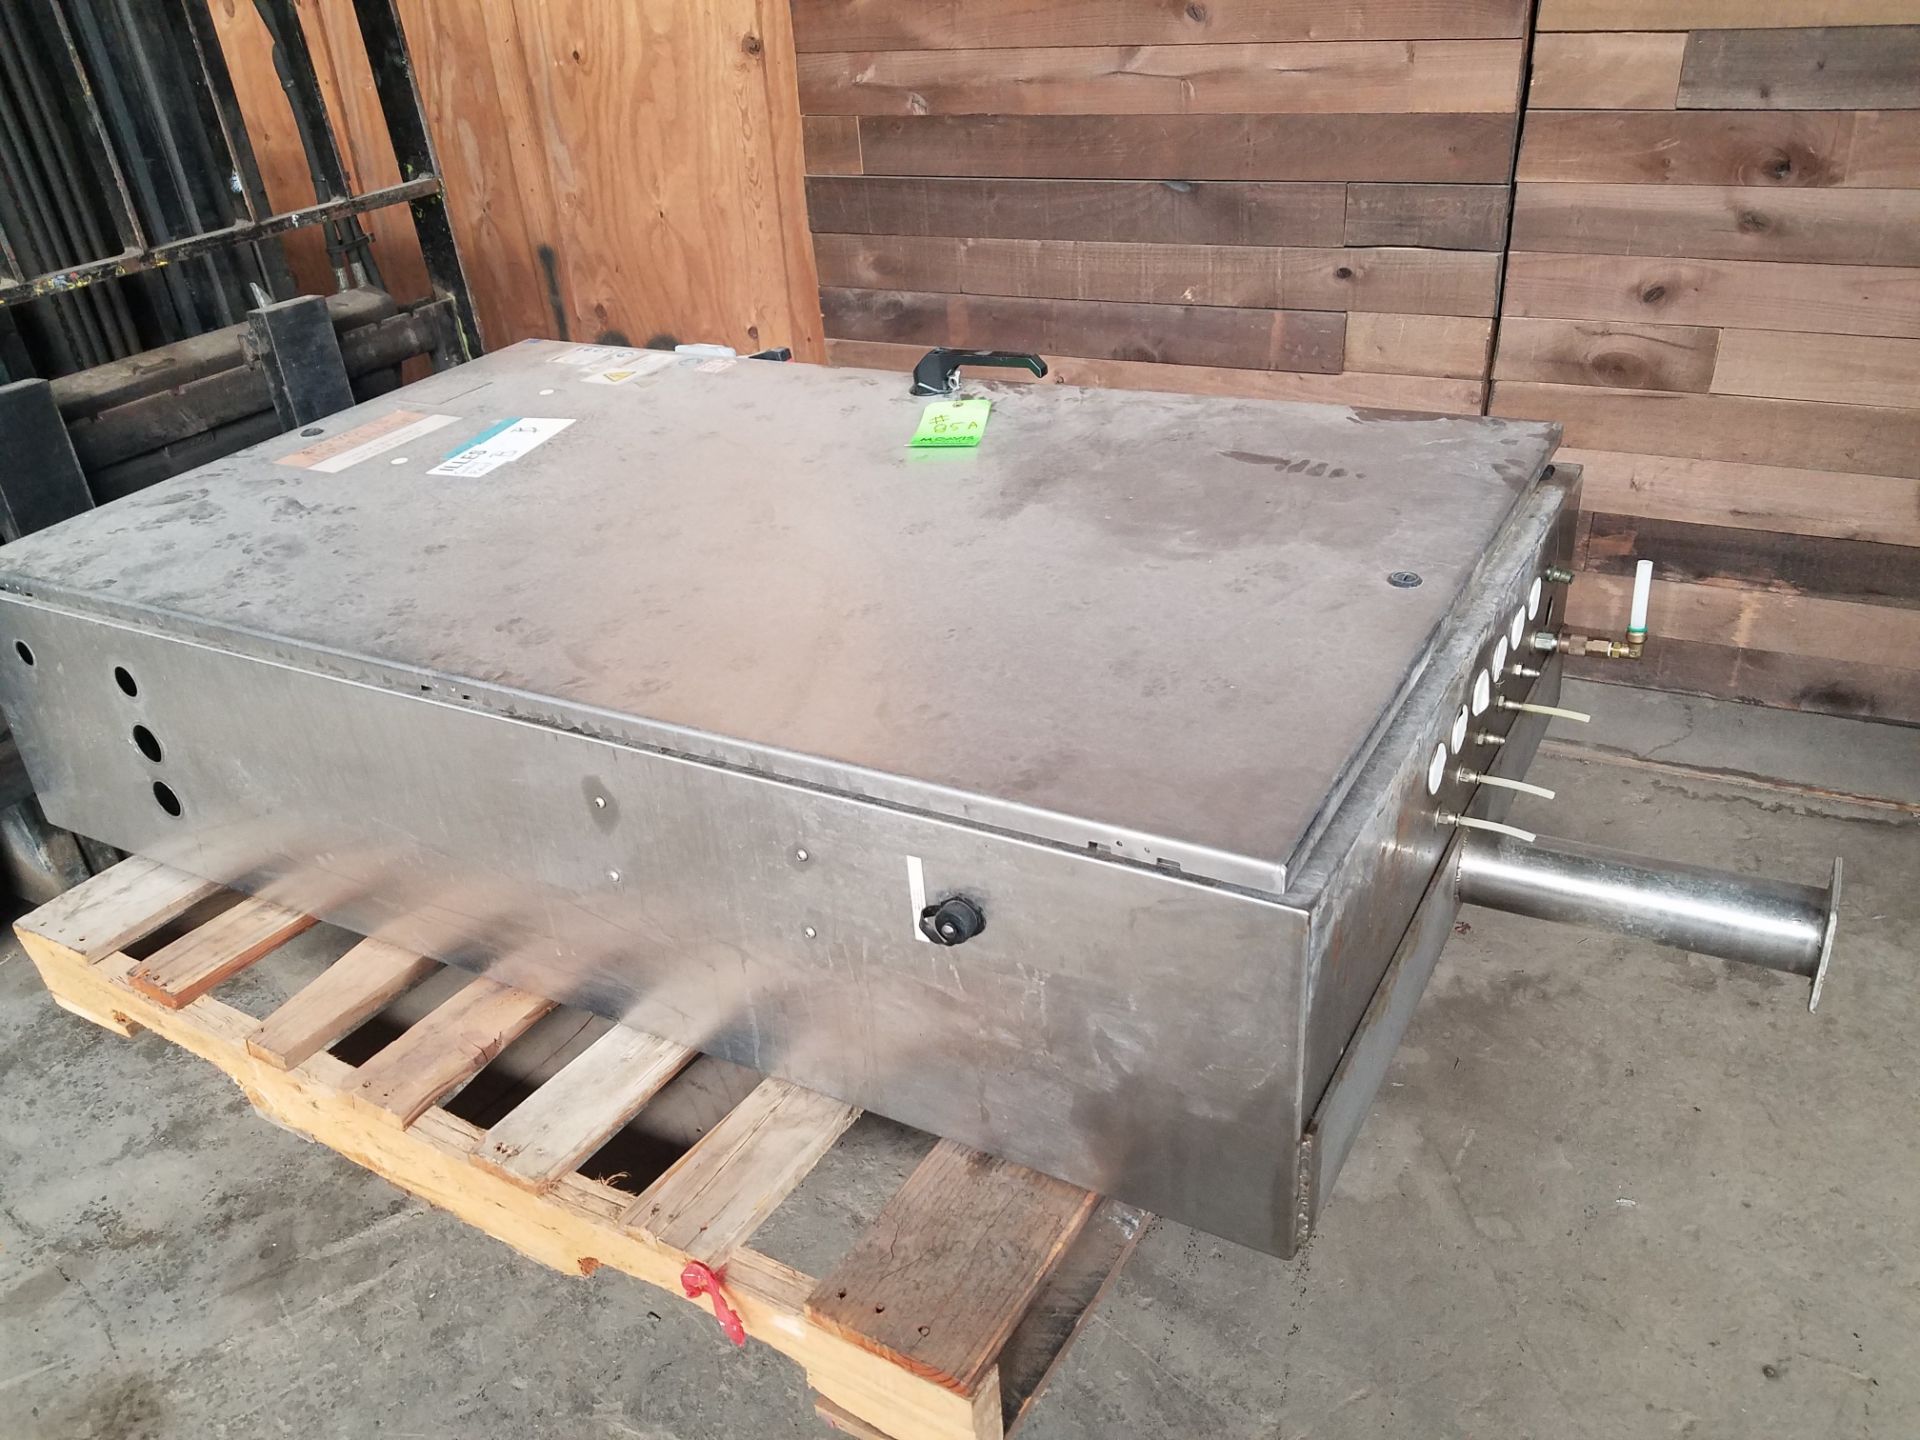 S/S Electric Cabinet - Aprox. 36" x 60" x 12" (Loading, Rigging & Site Management Fee $50.00 USD)